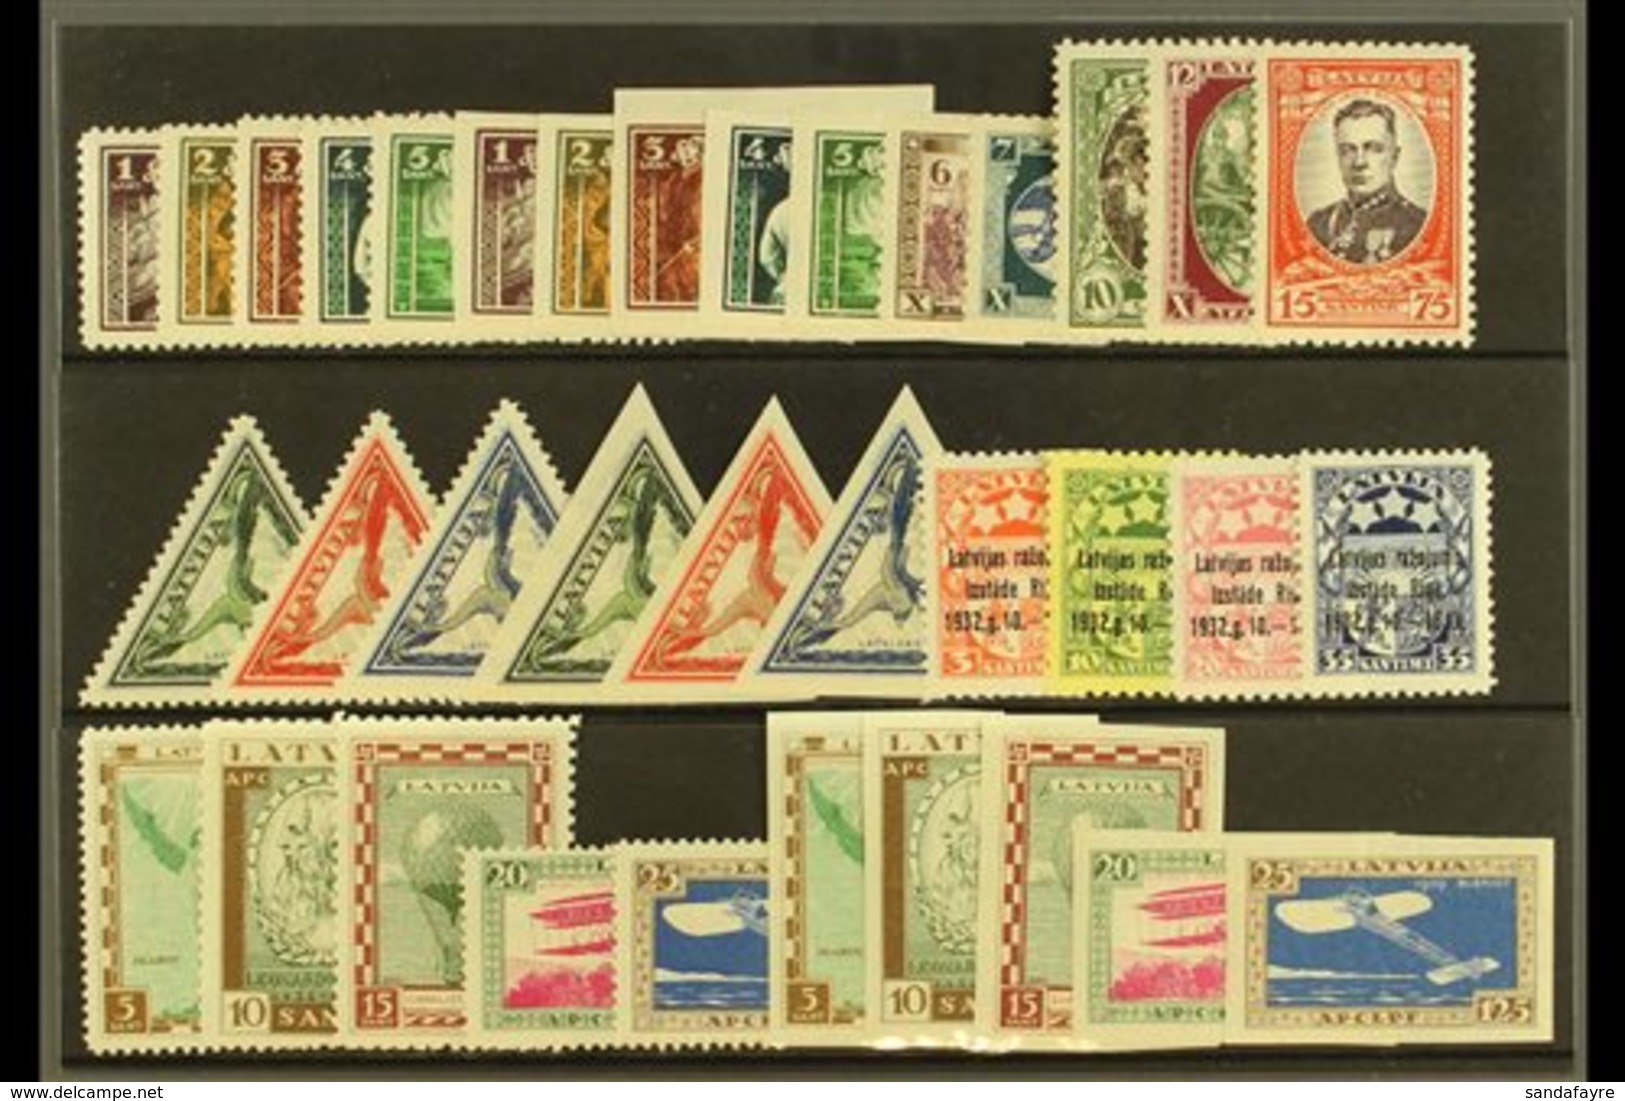 1932 A Fine Mint Collection Of Sets From This Year (Mi 193A/214A) Including Most Imperforate Set Variants. (35 Stamps) F - Lettland